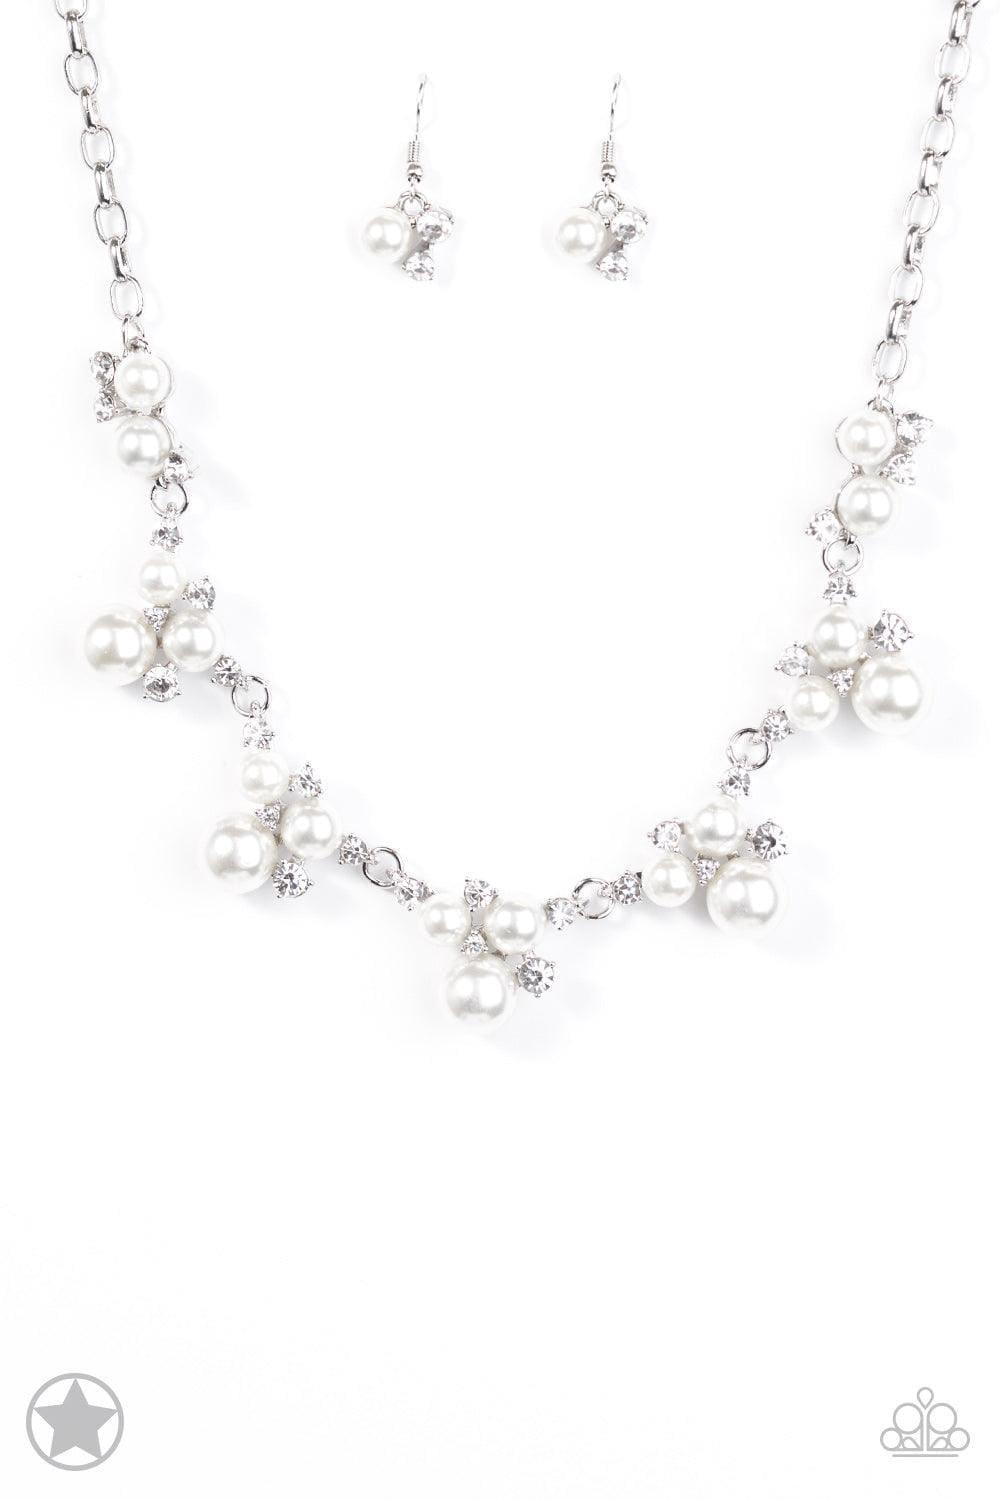 Paparazzi Accessories - Paparazzi Blockbuster Necklace: Toast To Perfection White - Bling by JessieK